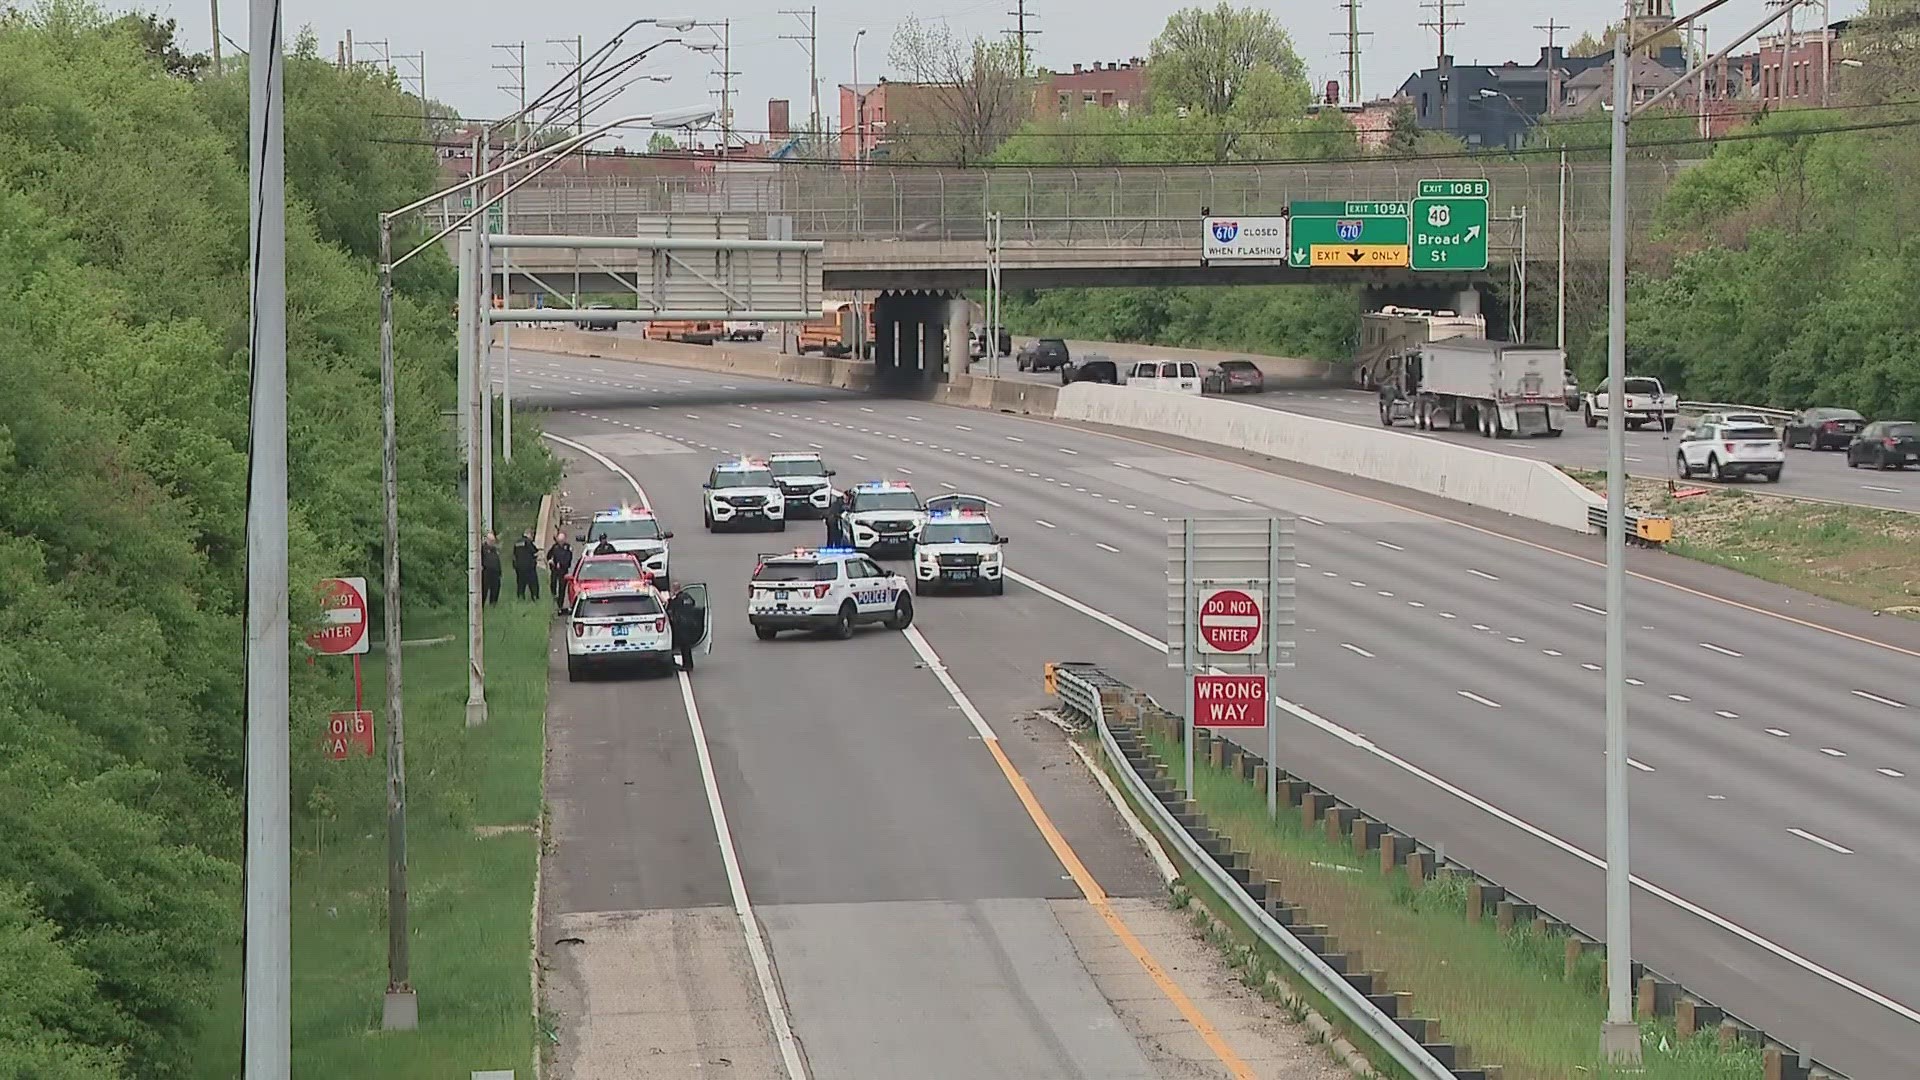 Columbus police are seeking two persons of interest in connection to Tuesday’s shooting on I-71 that sent one woman to the hospital.